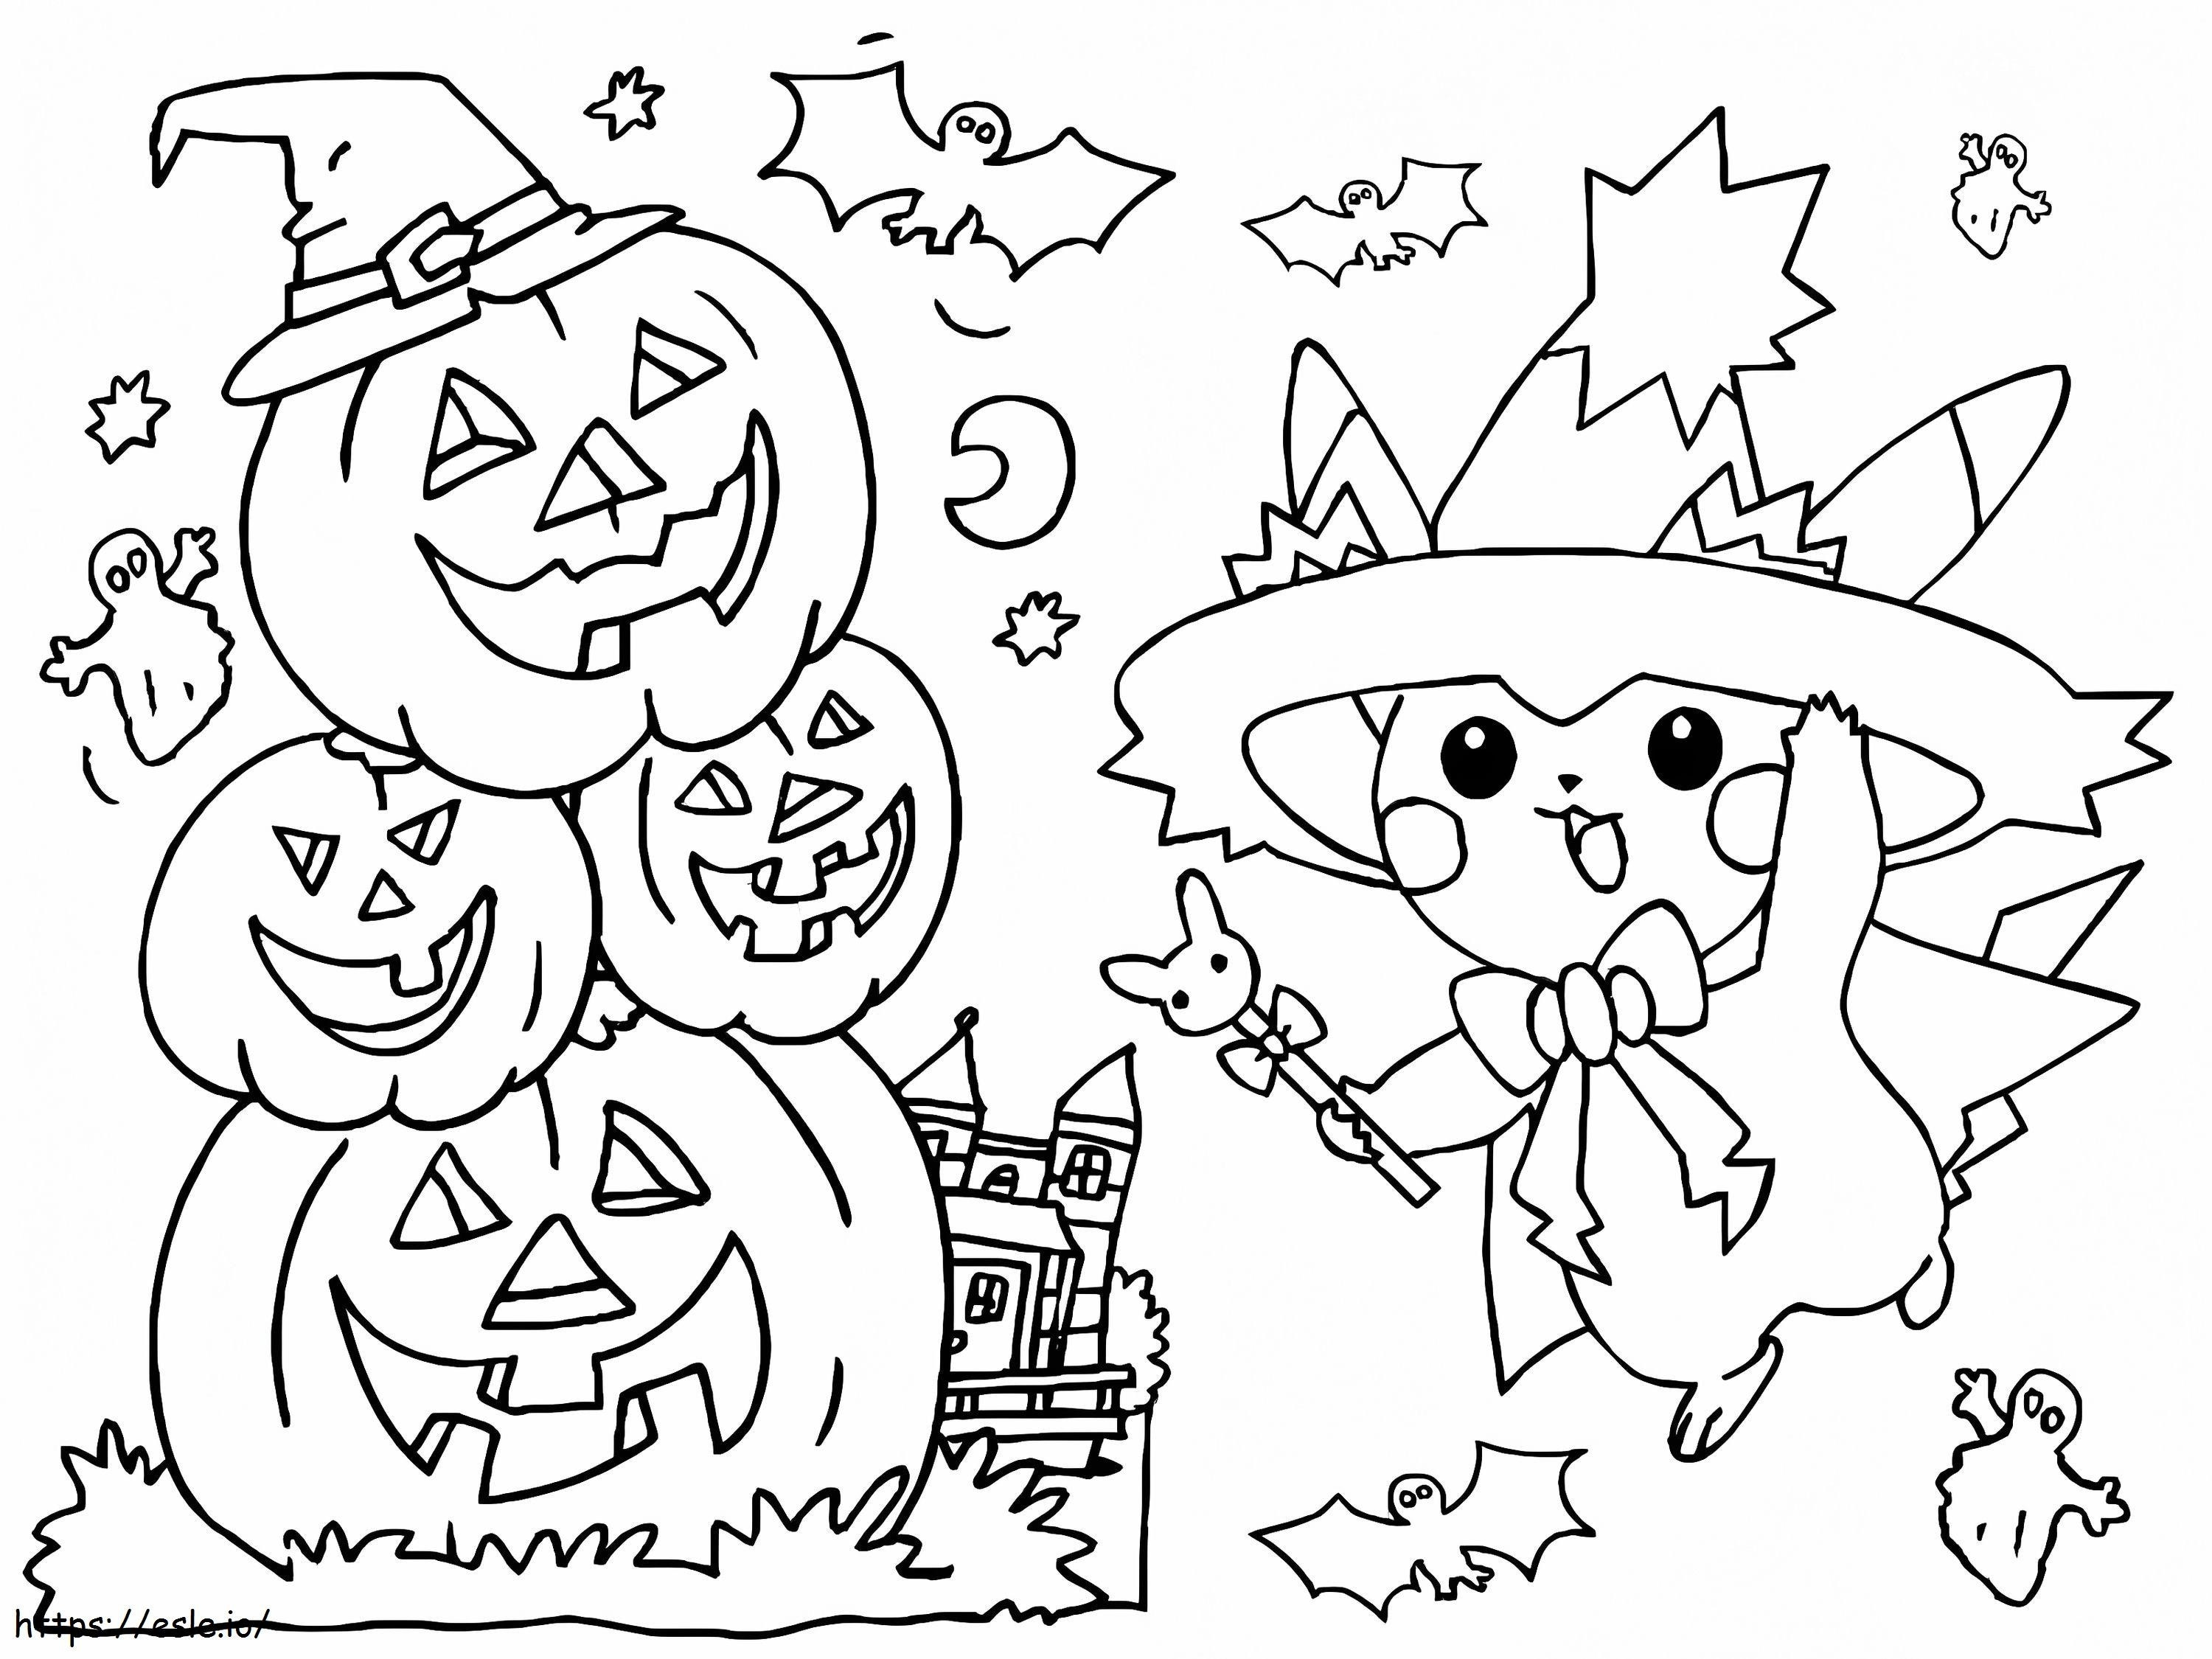 Pikachu And Halloween Pumpkins coloring page